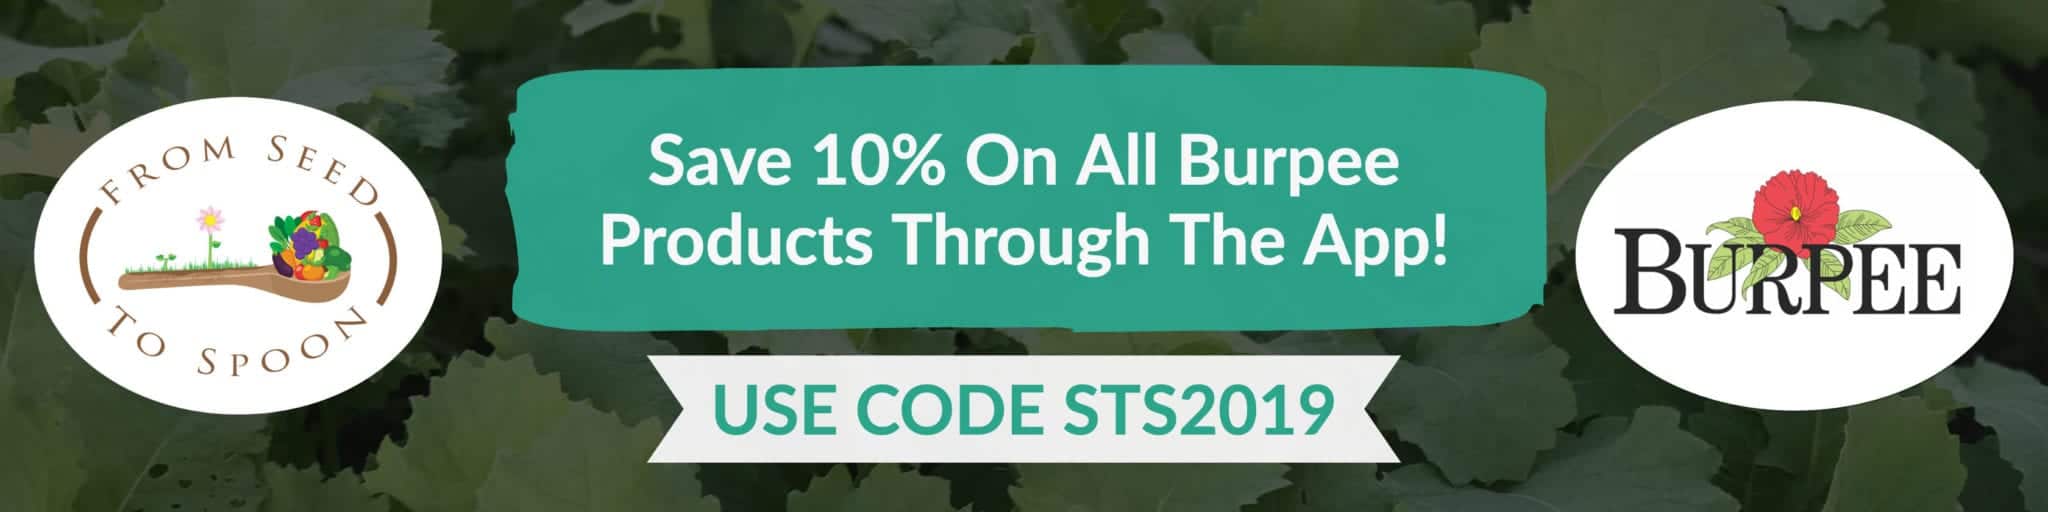 Save 10% on All Burpee Products with Code STS2019